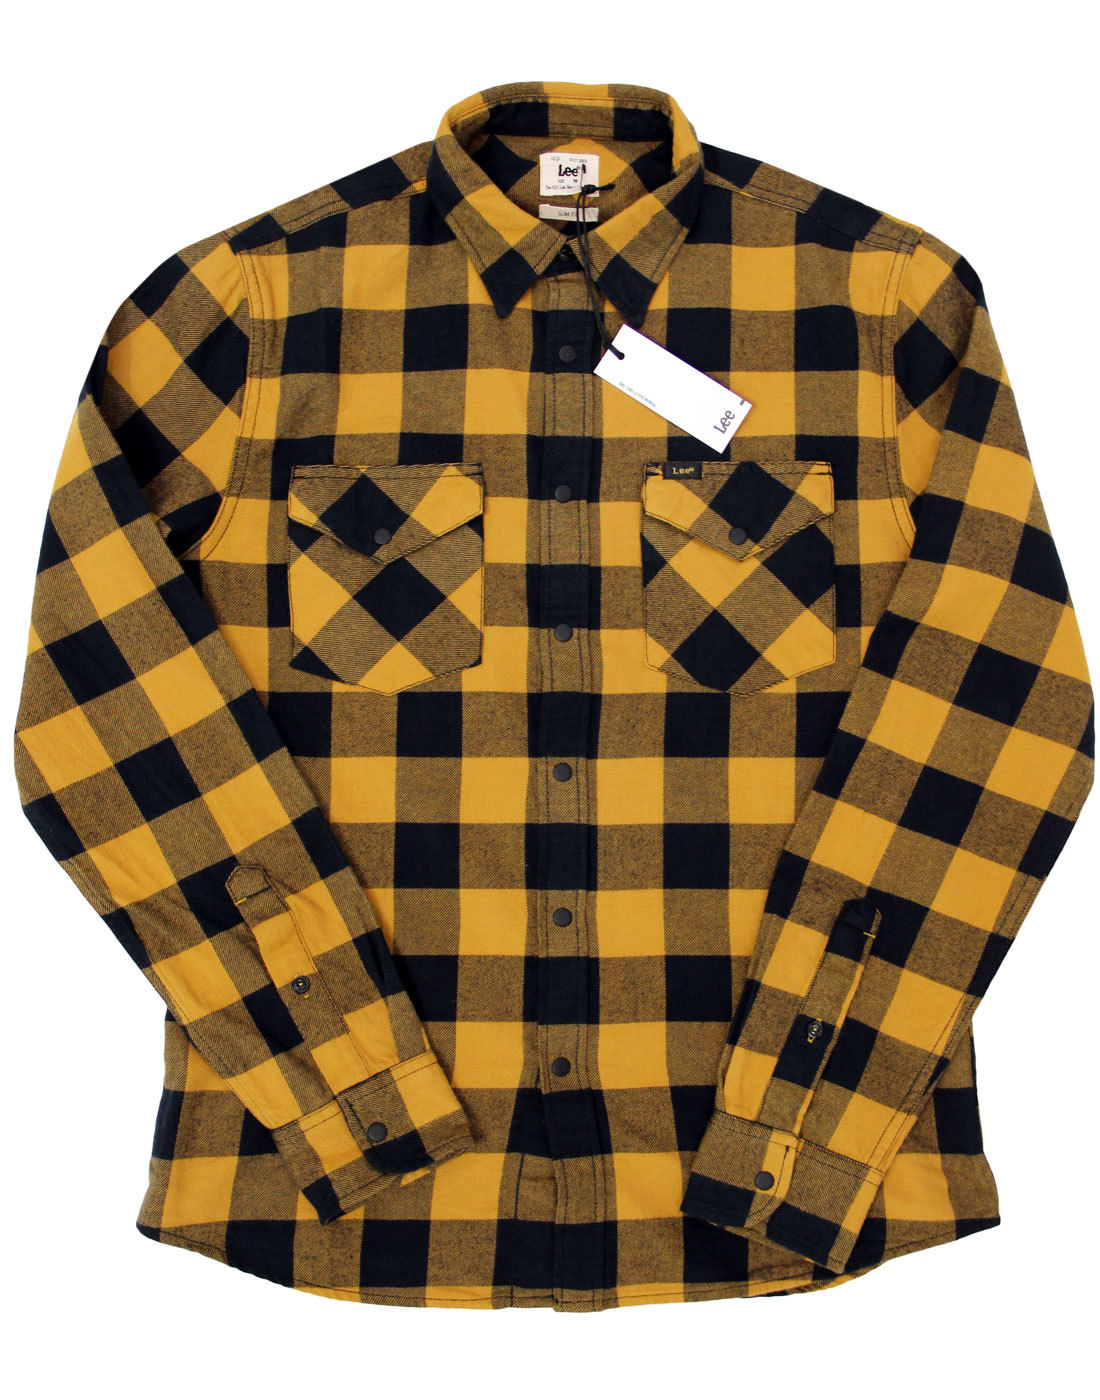 LEE Retro Mod Block Check Brushed Cotton Western Shirt in Mustard